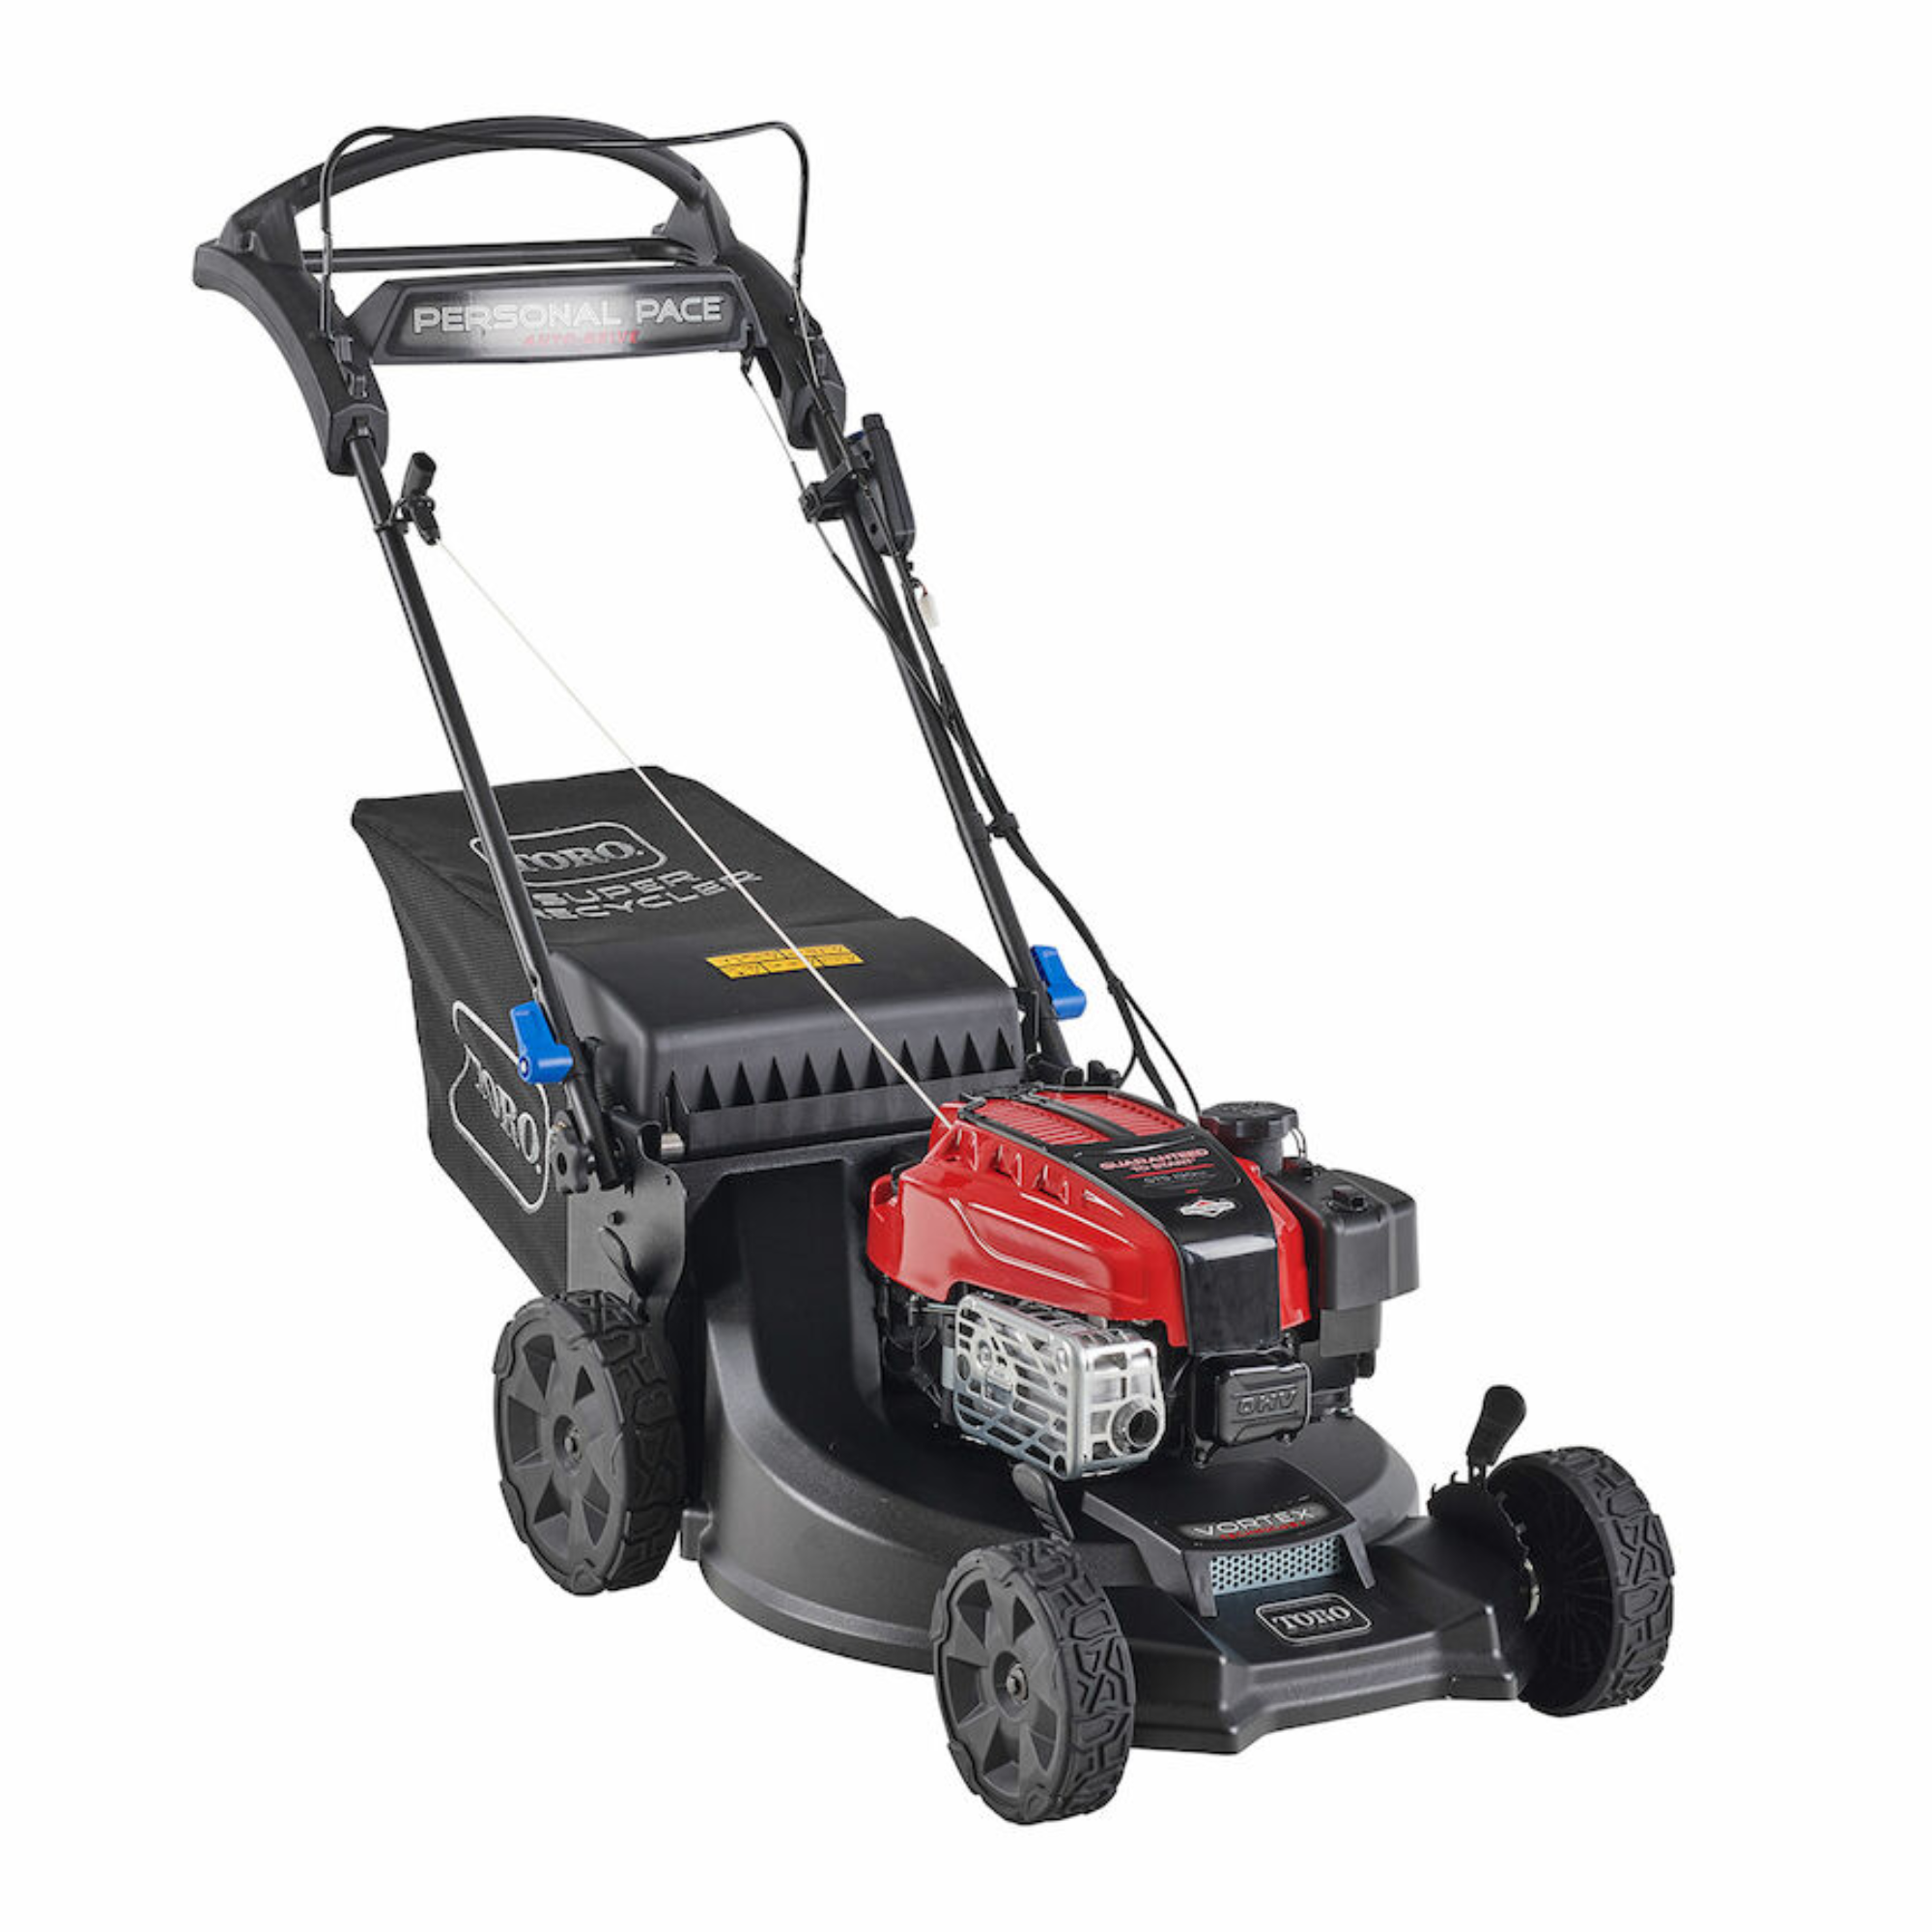 Toro Super Recycler w/Personal Pace & SmartStow Gas Powered Lawn Mower | 21 in. Deck | 21564